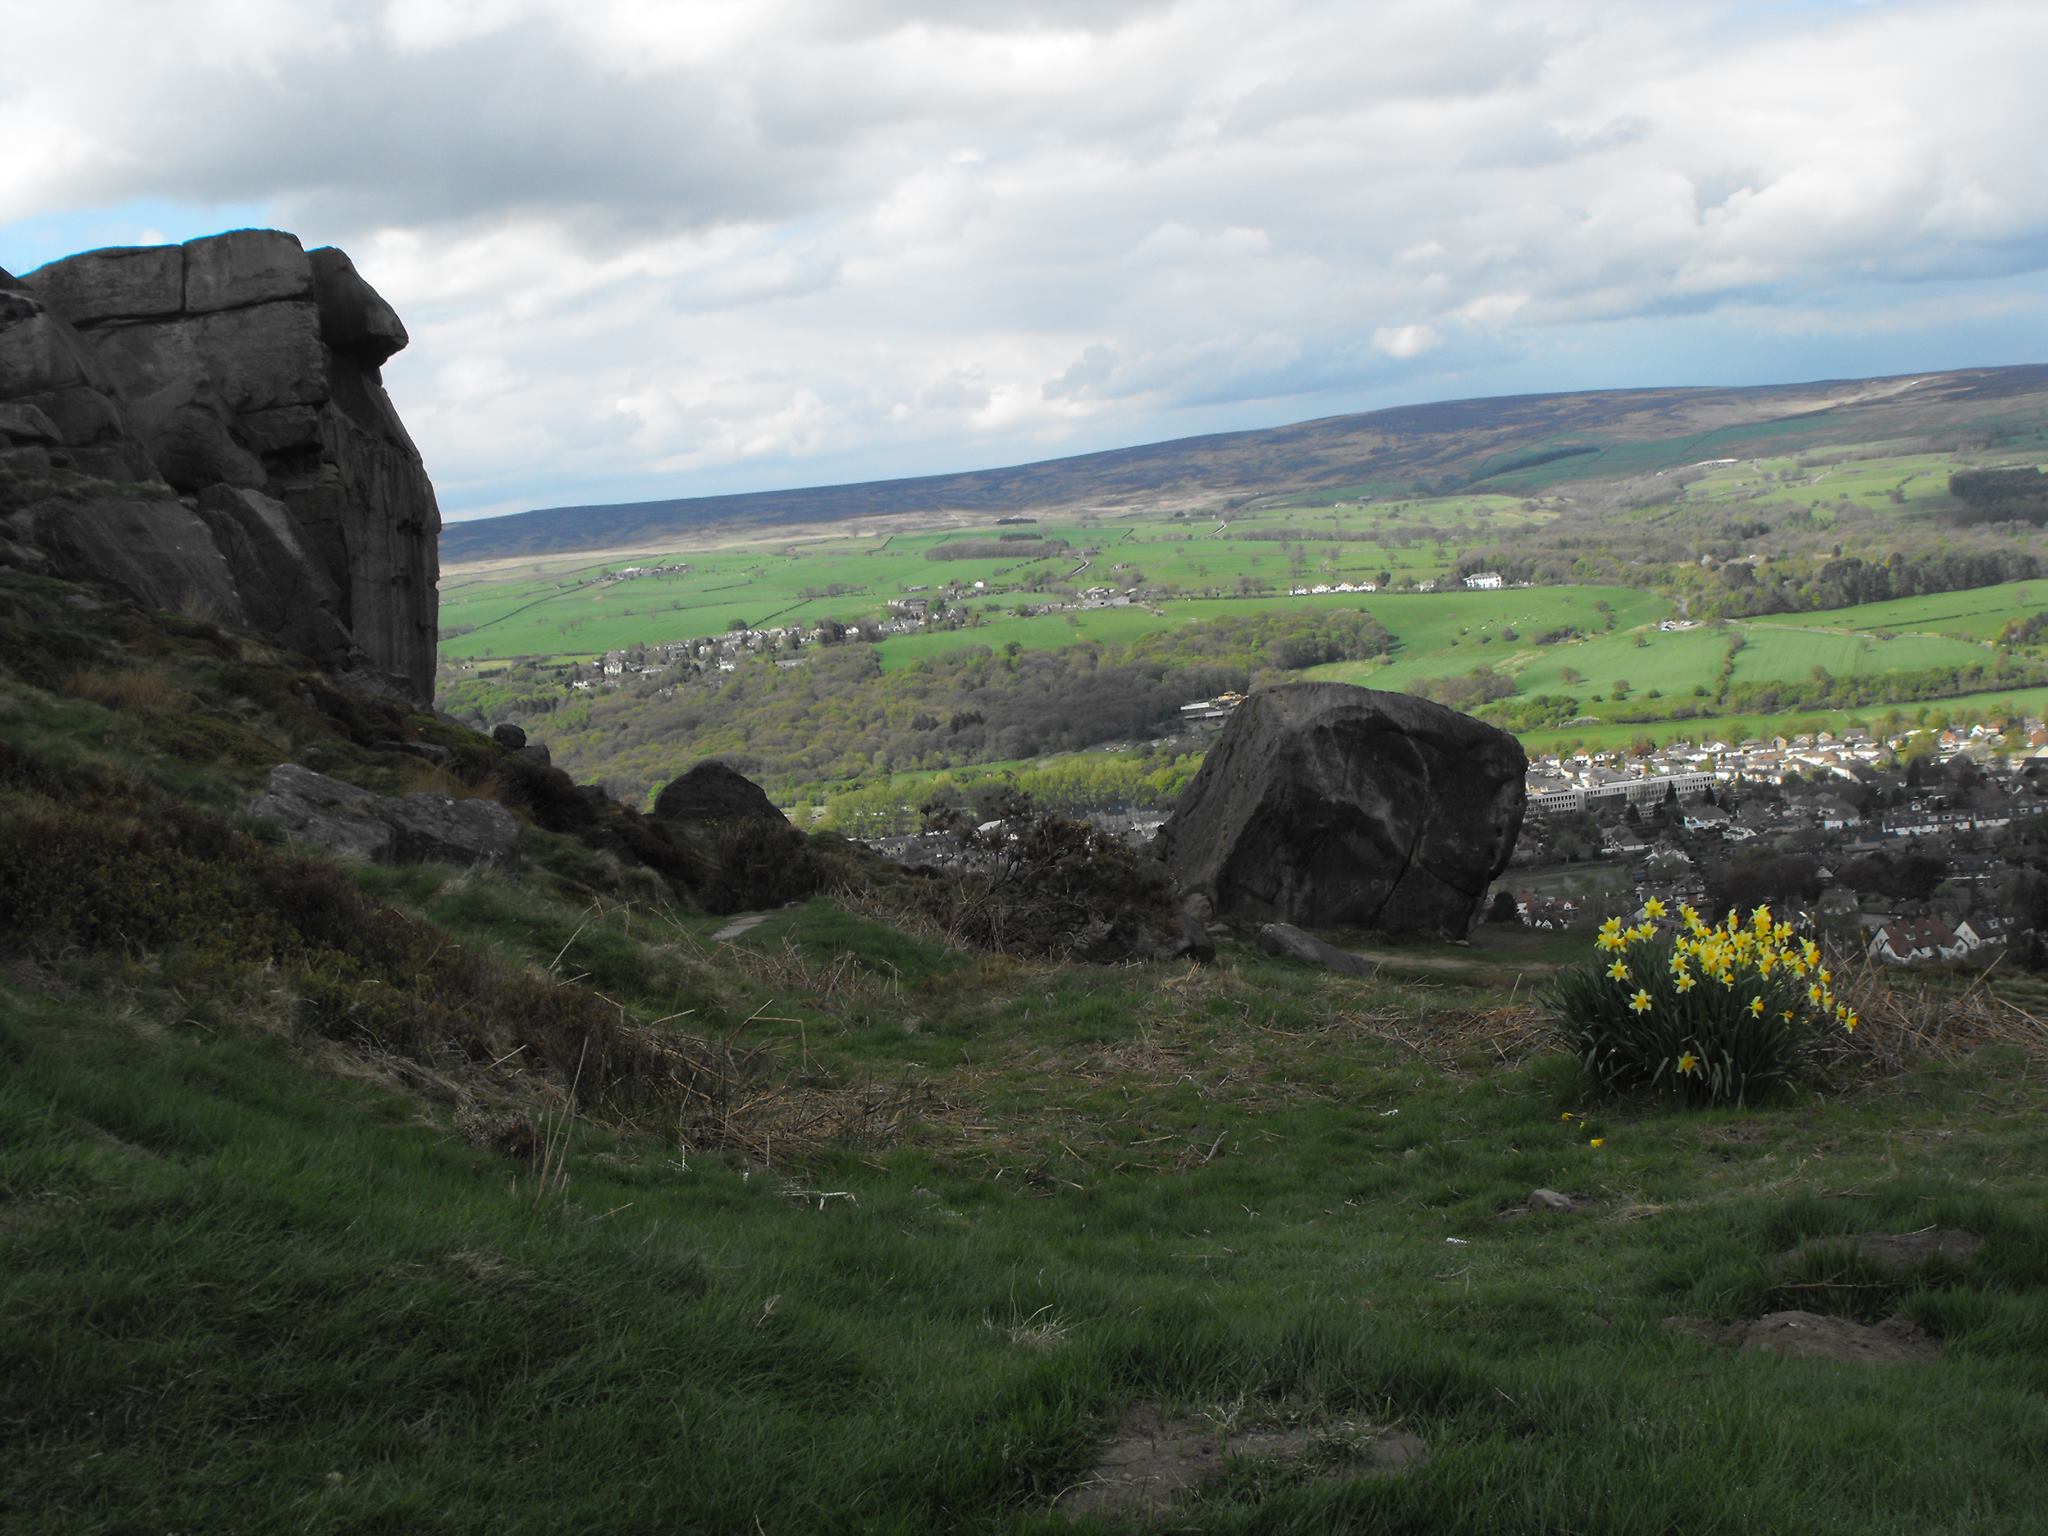 The Cow and Calf rocks looking over Ilkley (sent in by Brian Harvey Dickinson)